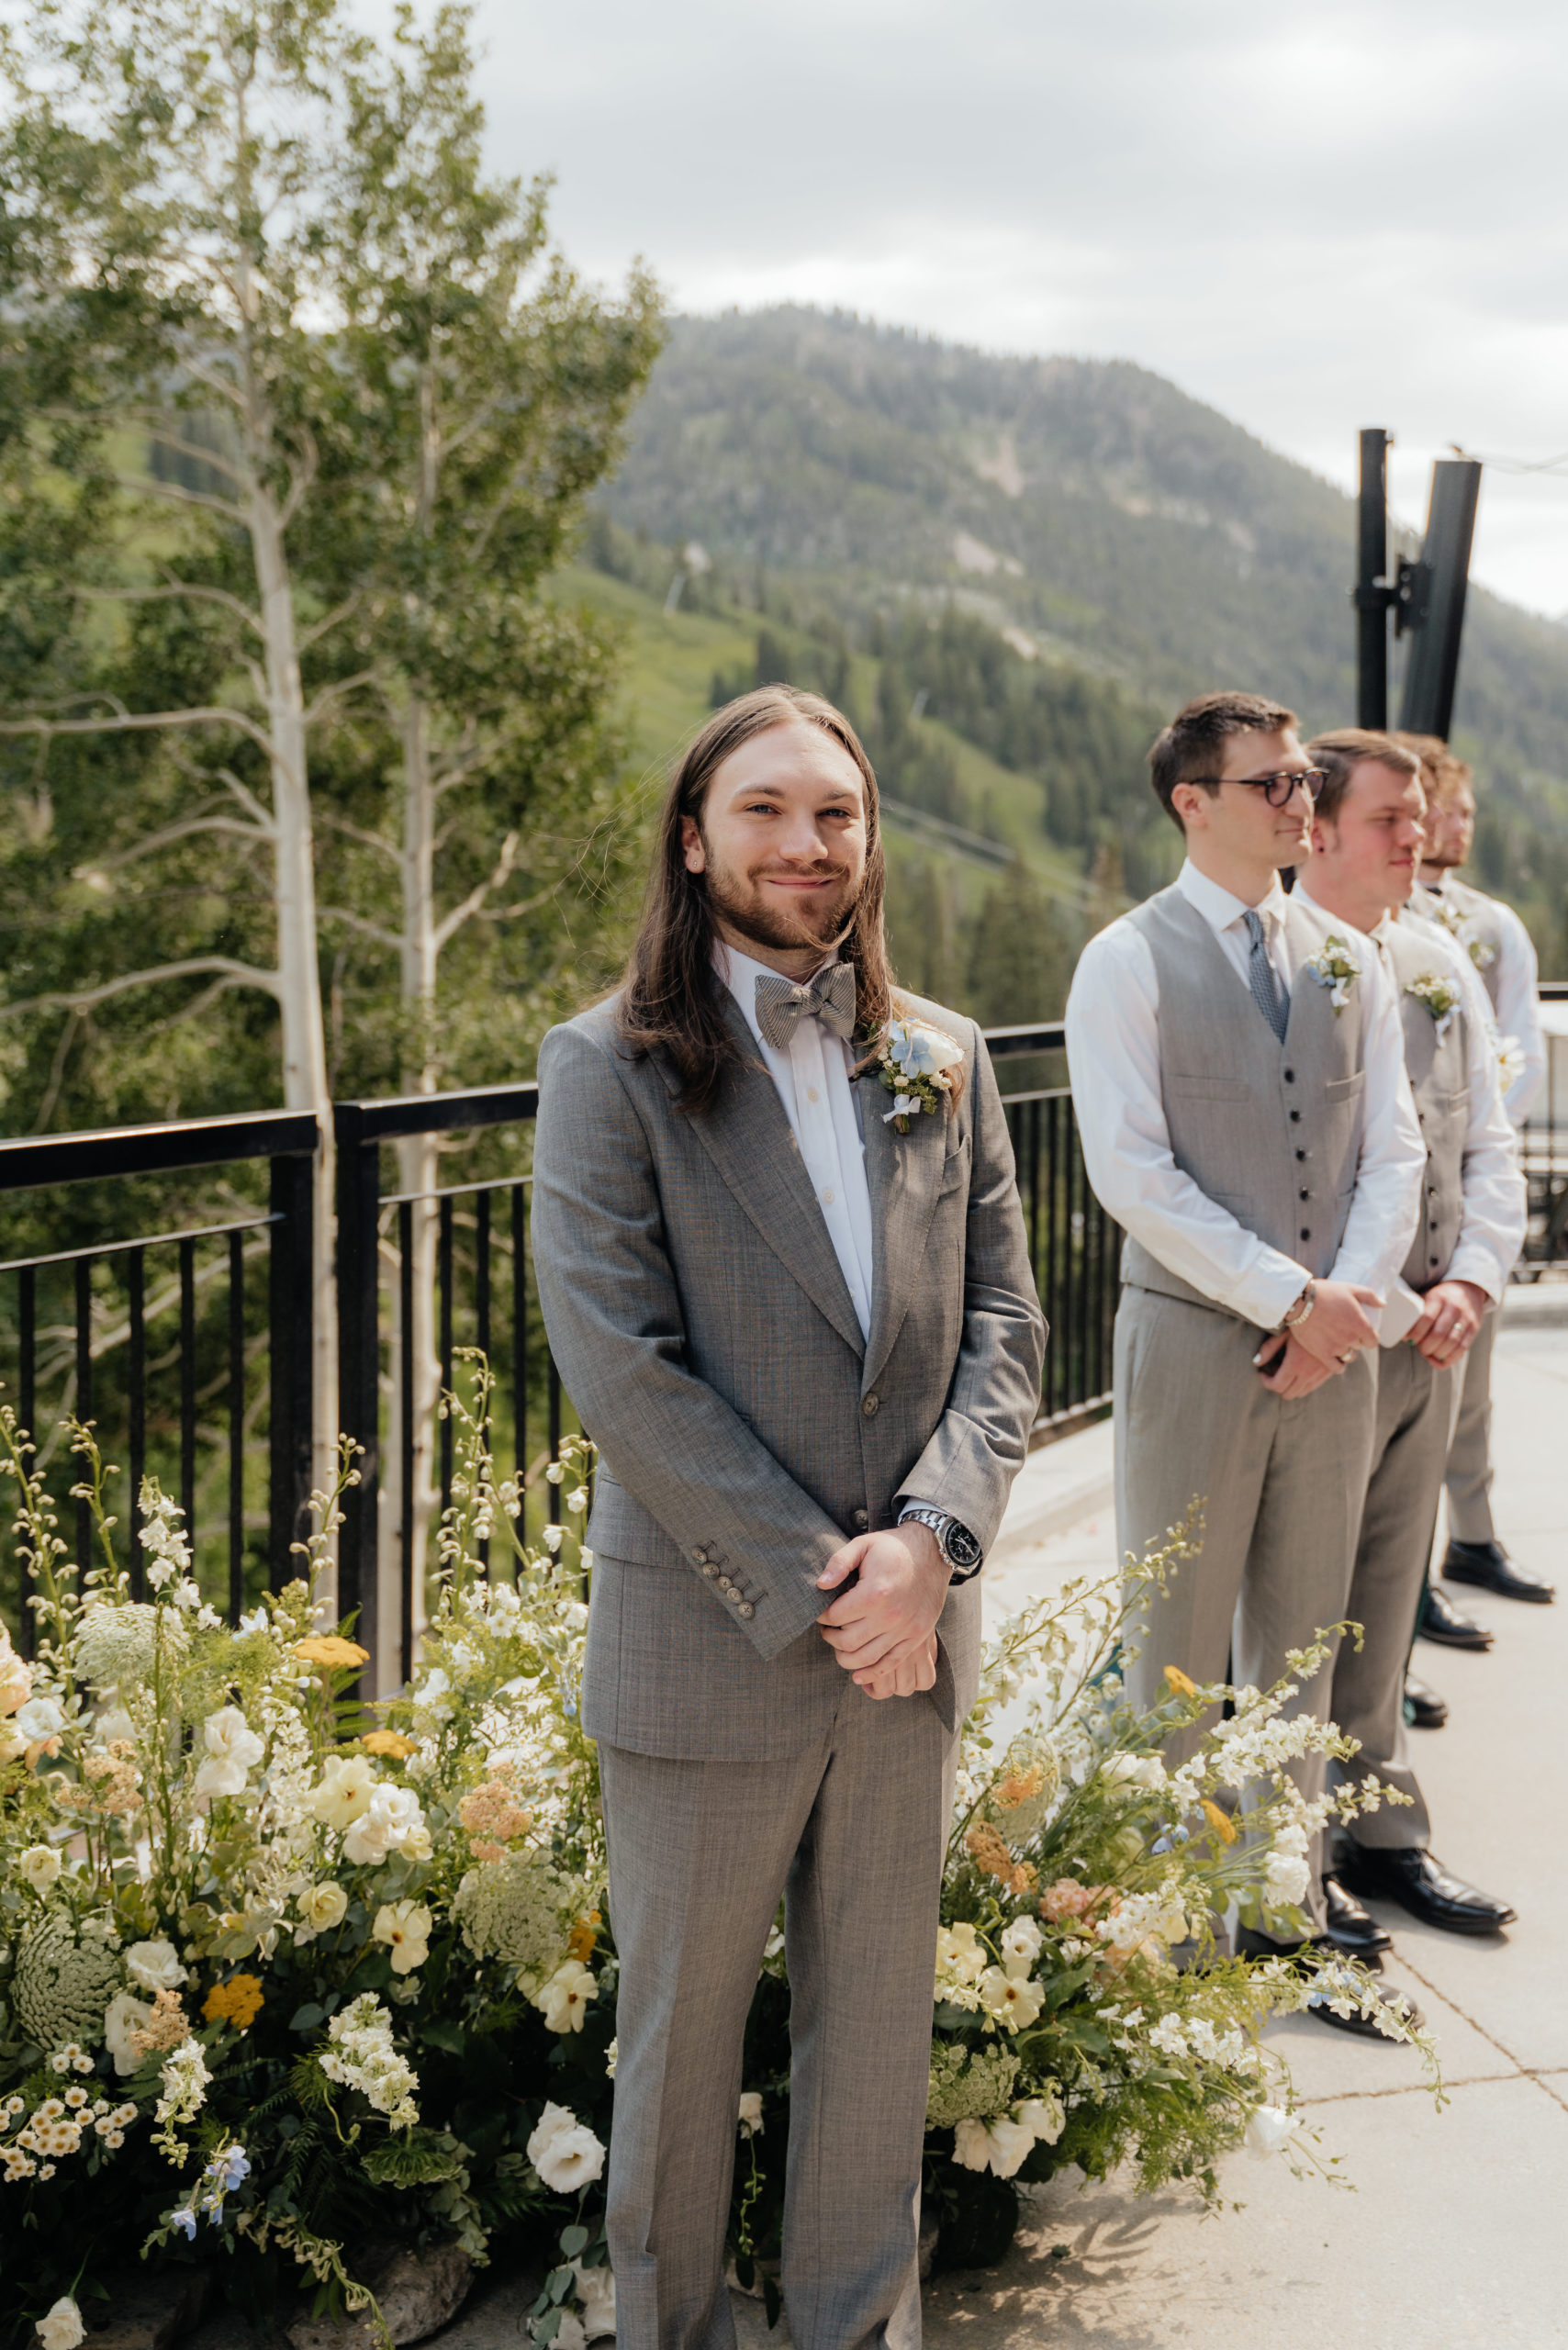 A groom stands in front of a nest of wildflowers smiling while watching his bride walk down the aisle with a mountain backdrop.